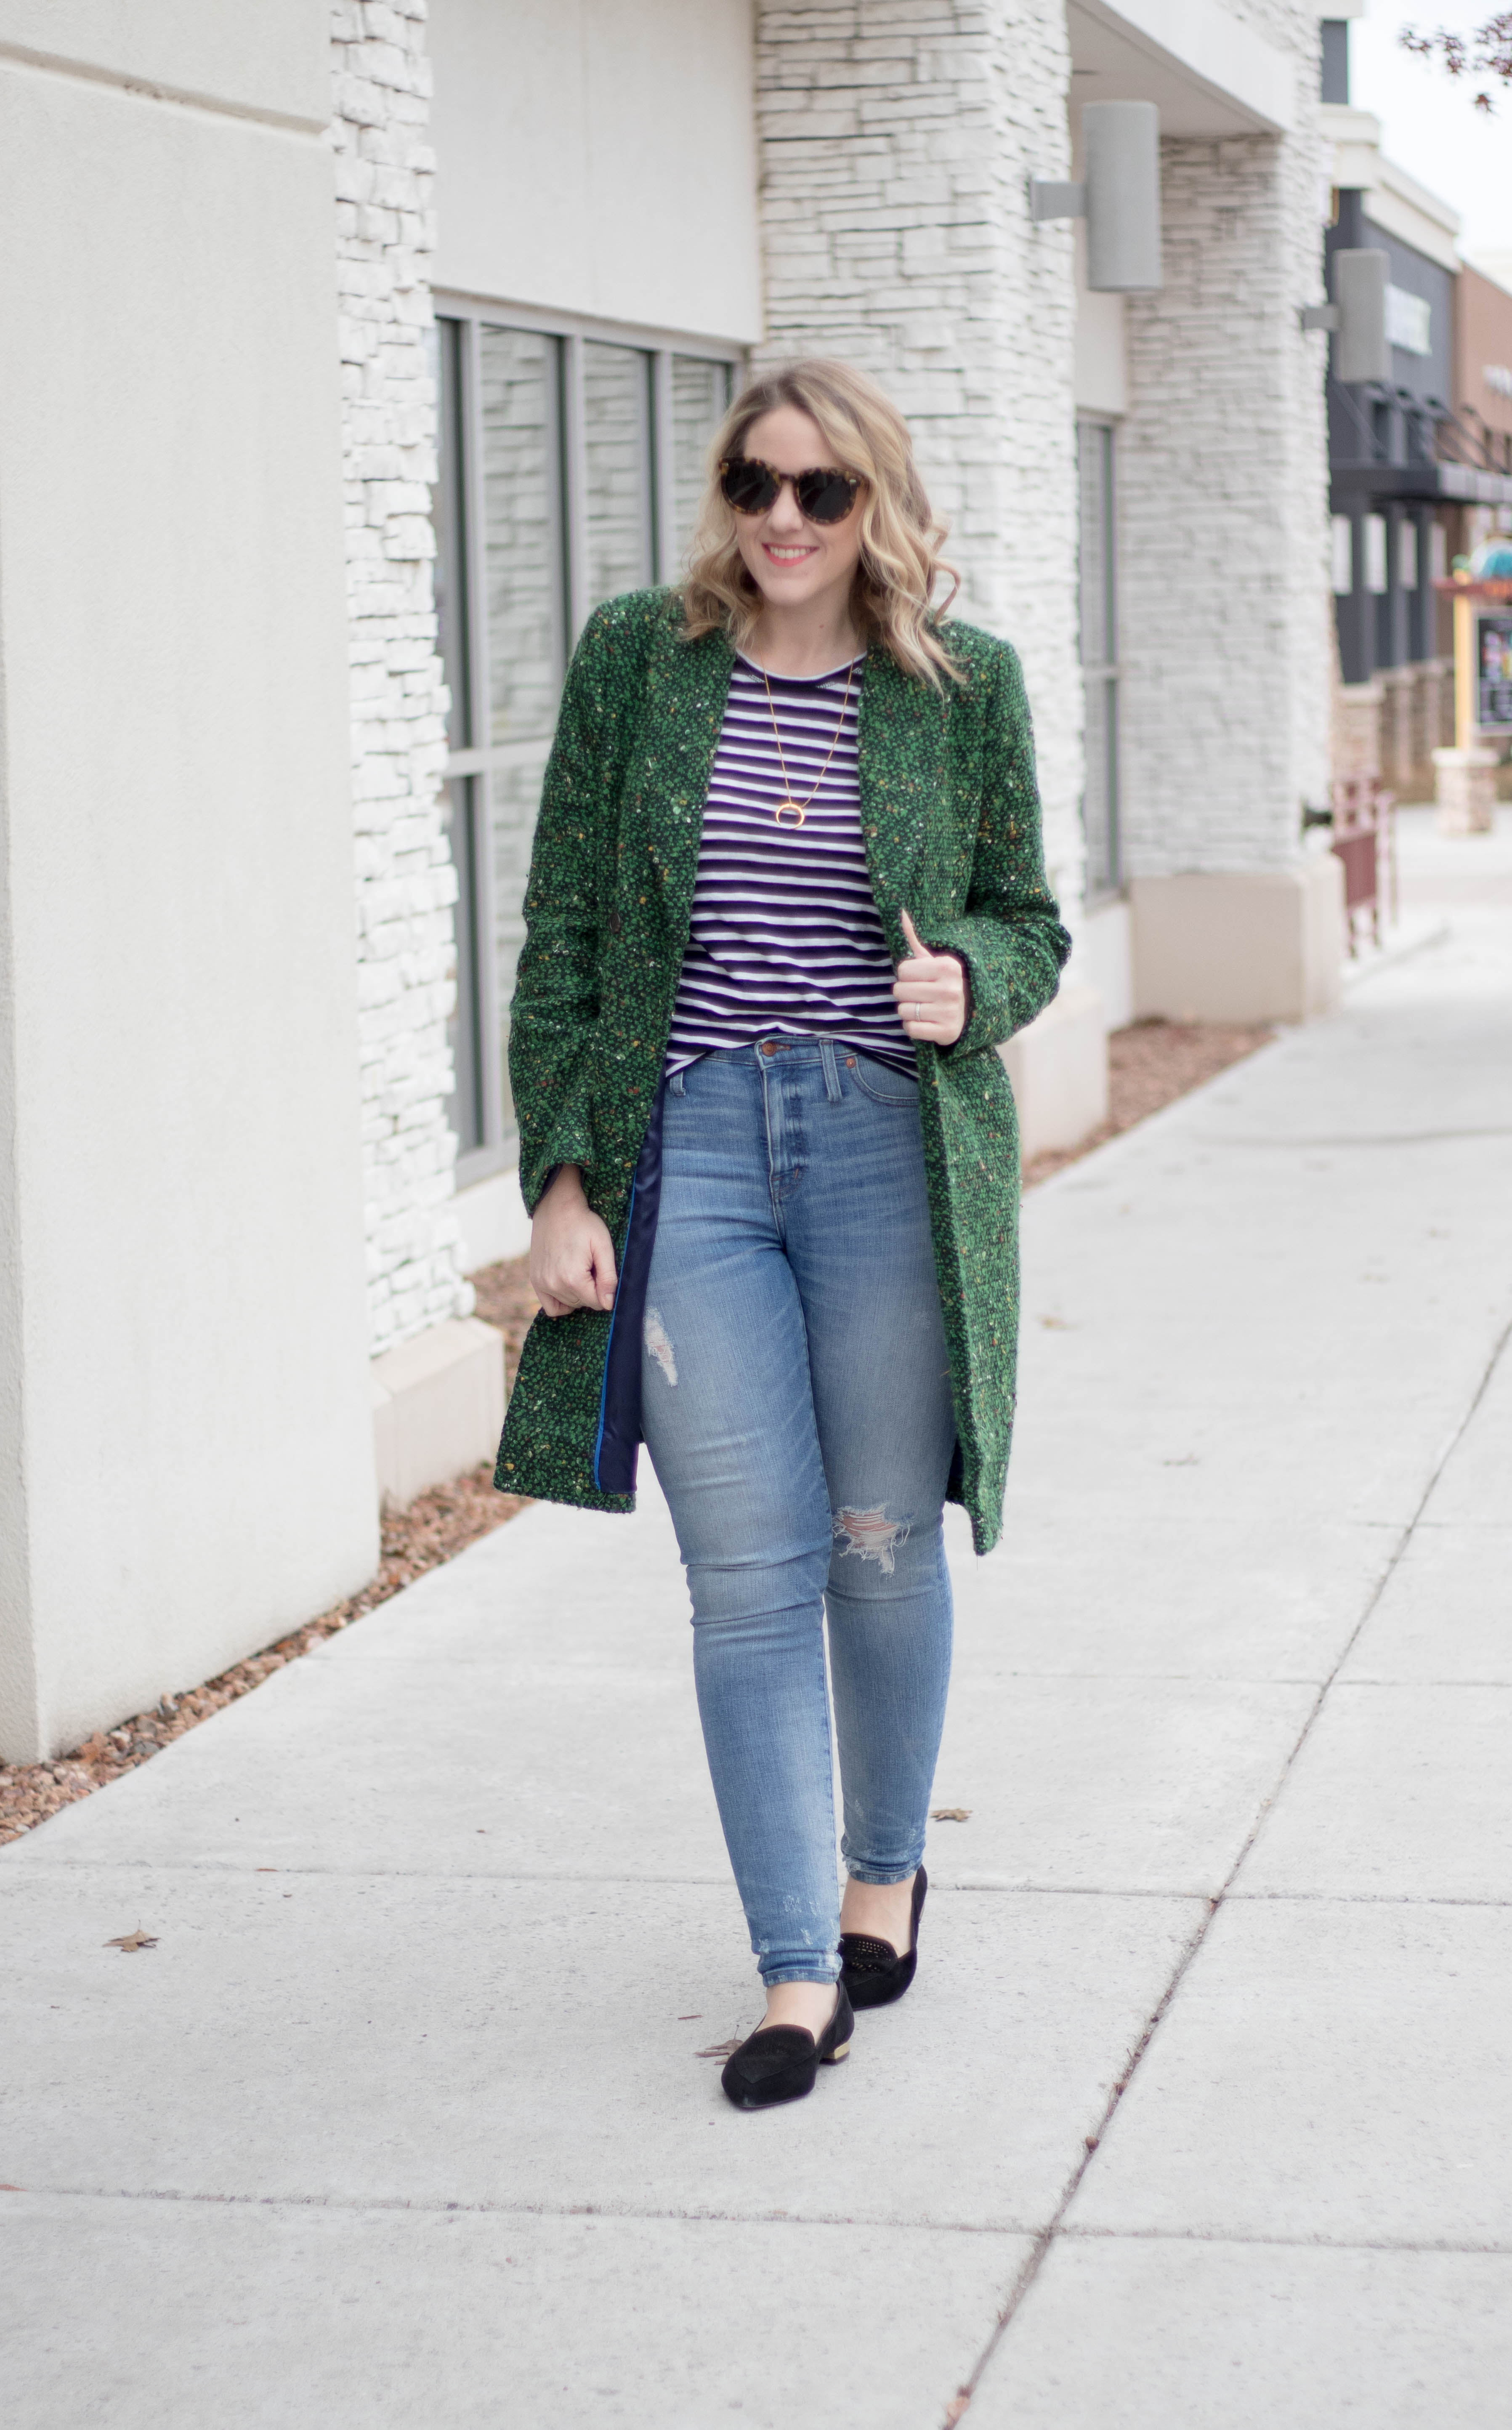 casual winter outfit with tweed coat #winterstyle #momstyle #jcrewcoat